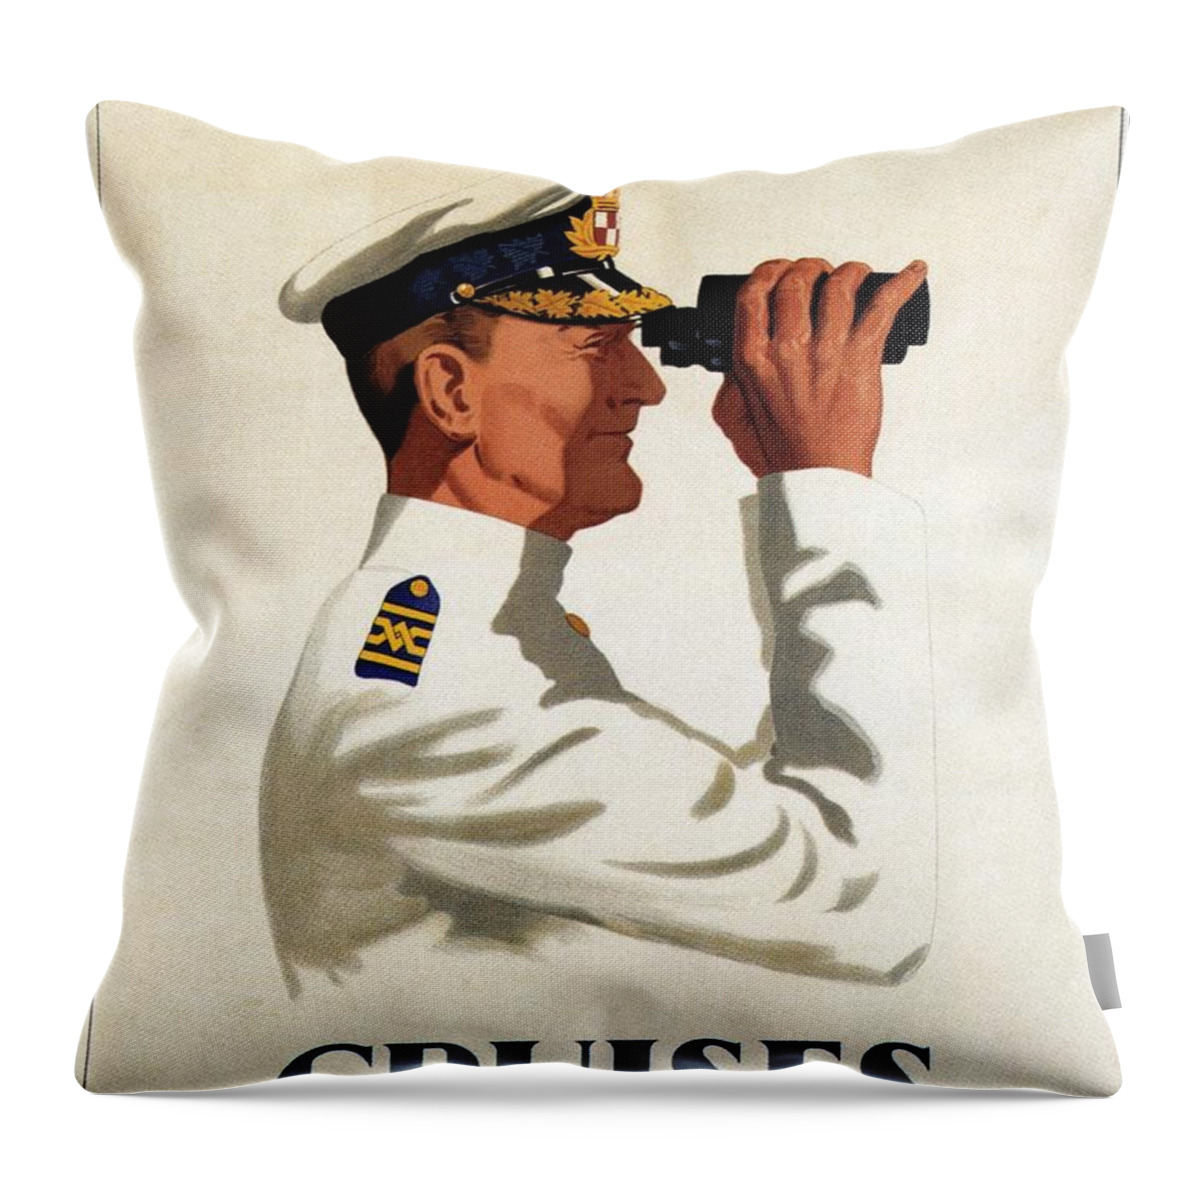 Canadian Pacific Throw Pillow featuring the mixed media Canadian Pacific - Cruises - Sailor With Binocular - Retro travel Poster - Vintage Poster by Studio Grafiikka